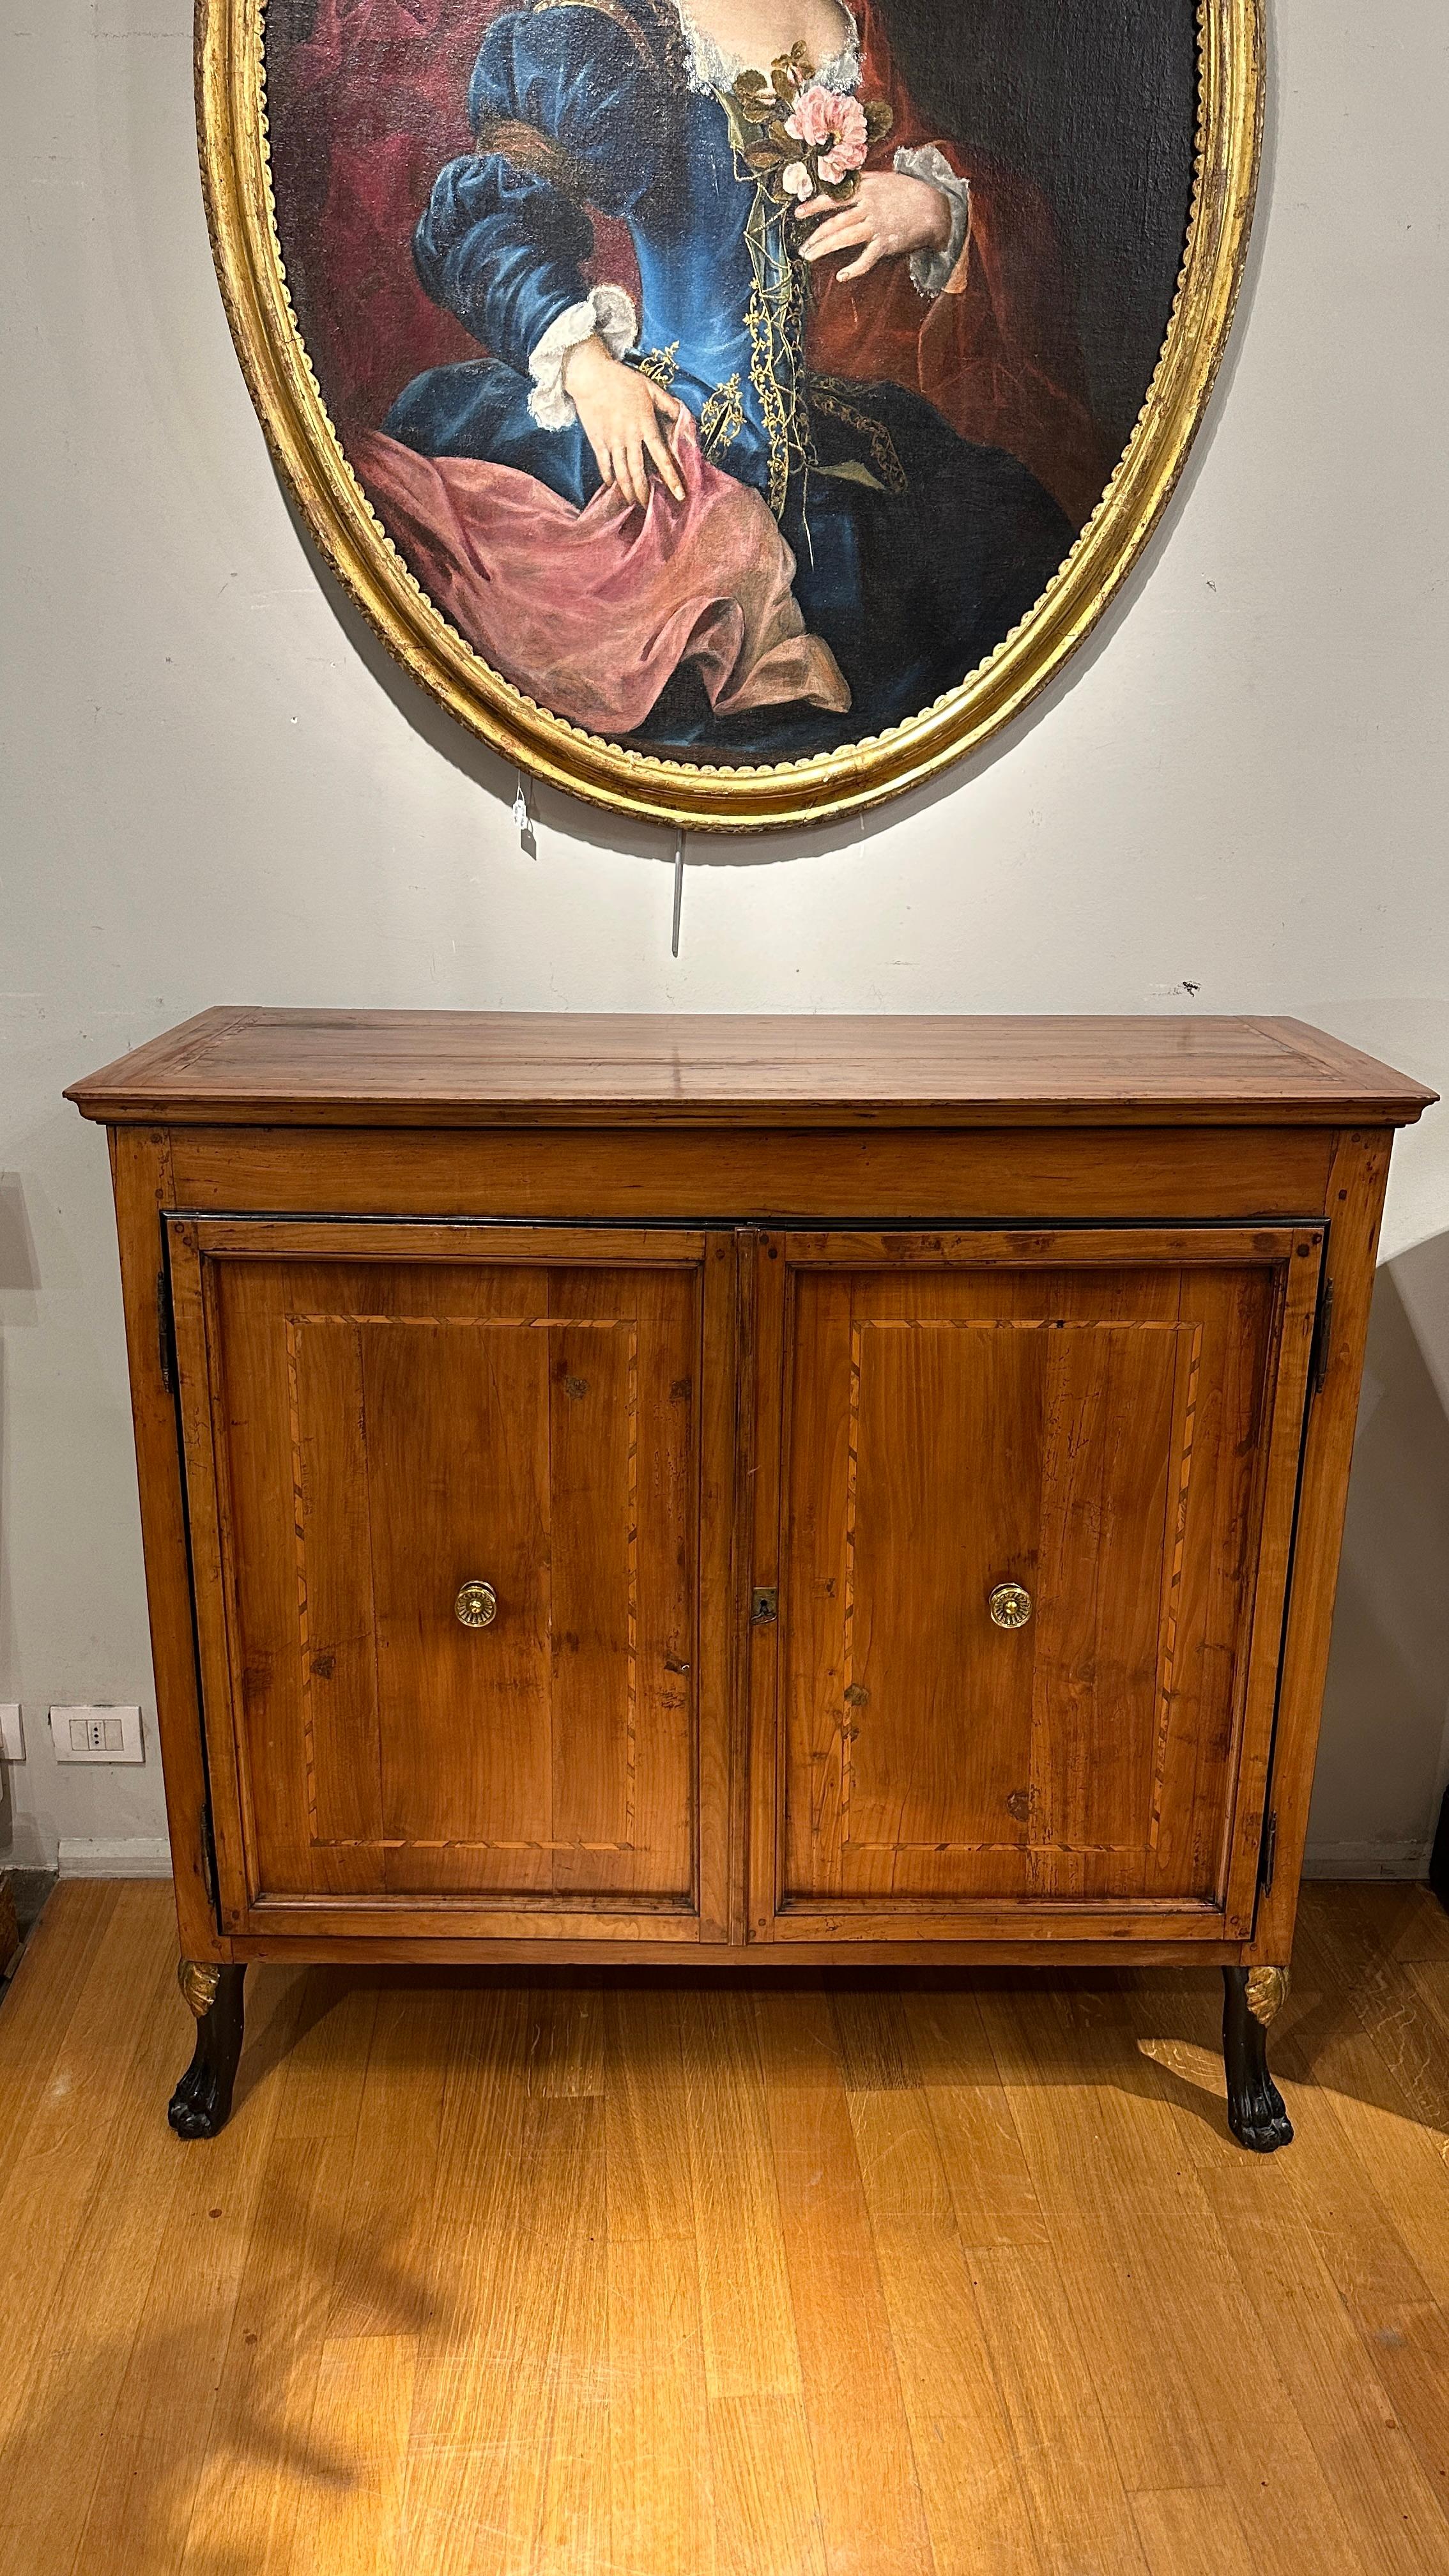 EARLY 19th CENTURY LUCHESE EMPIRE SIDEBOARD For Sale 6